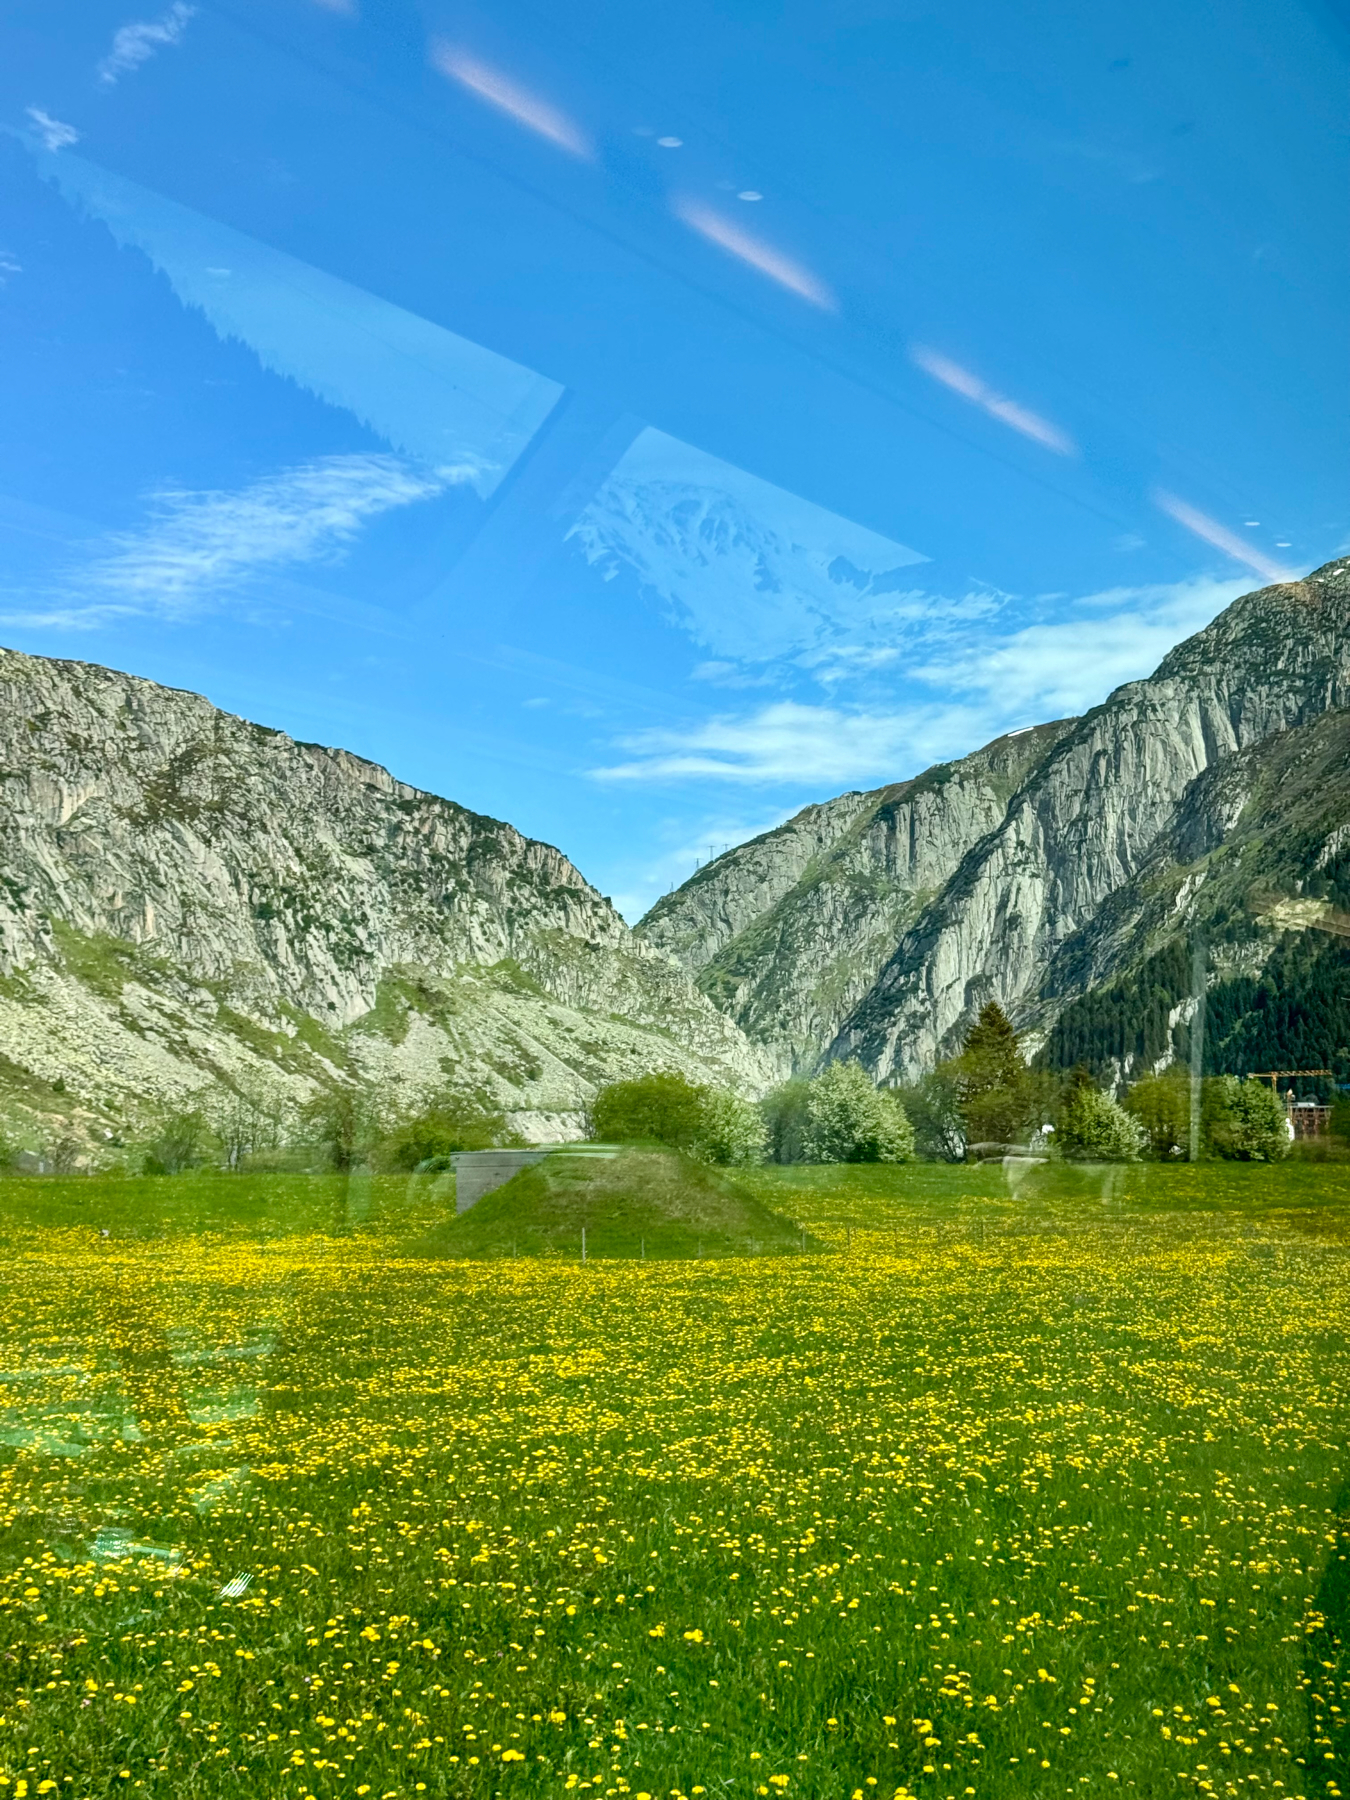 A vibrant field of yellow flowers with a backdrop of towering mountains and a clear blue sky, taken from behind a window as evidenced by light reflections visible across the image.